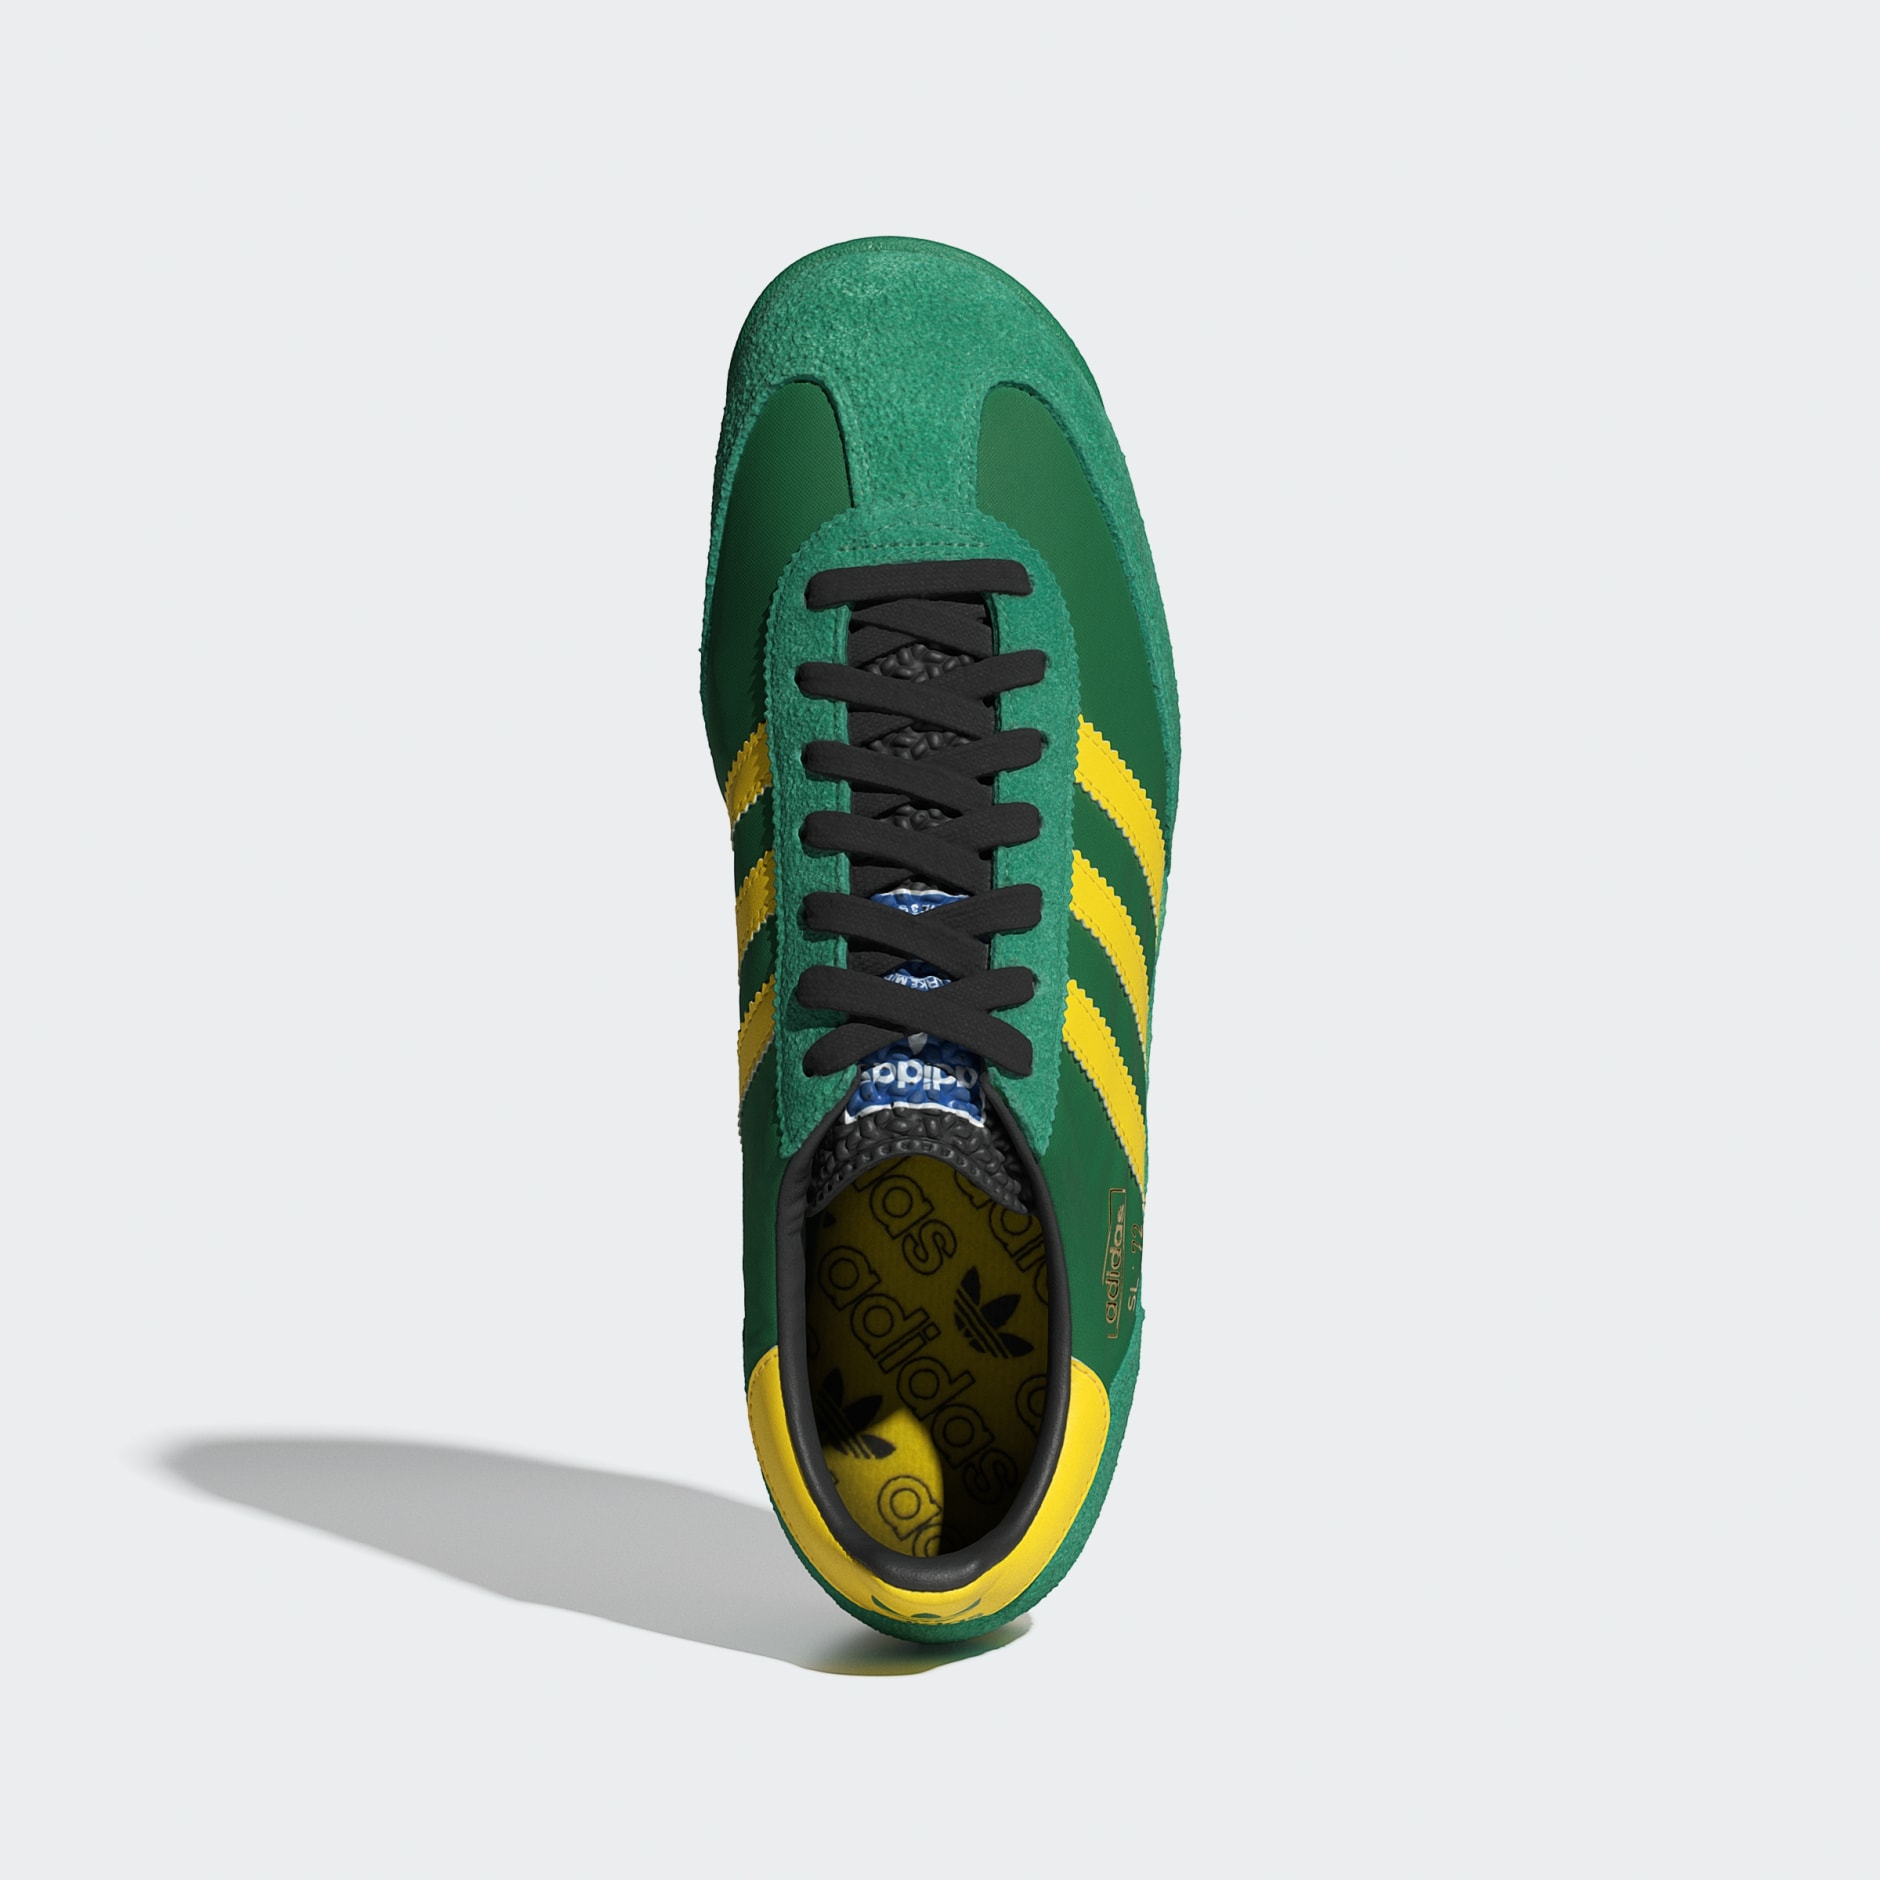 Shoes - SL 72 RS Shoes - Green | adidas South Africa